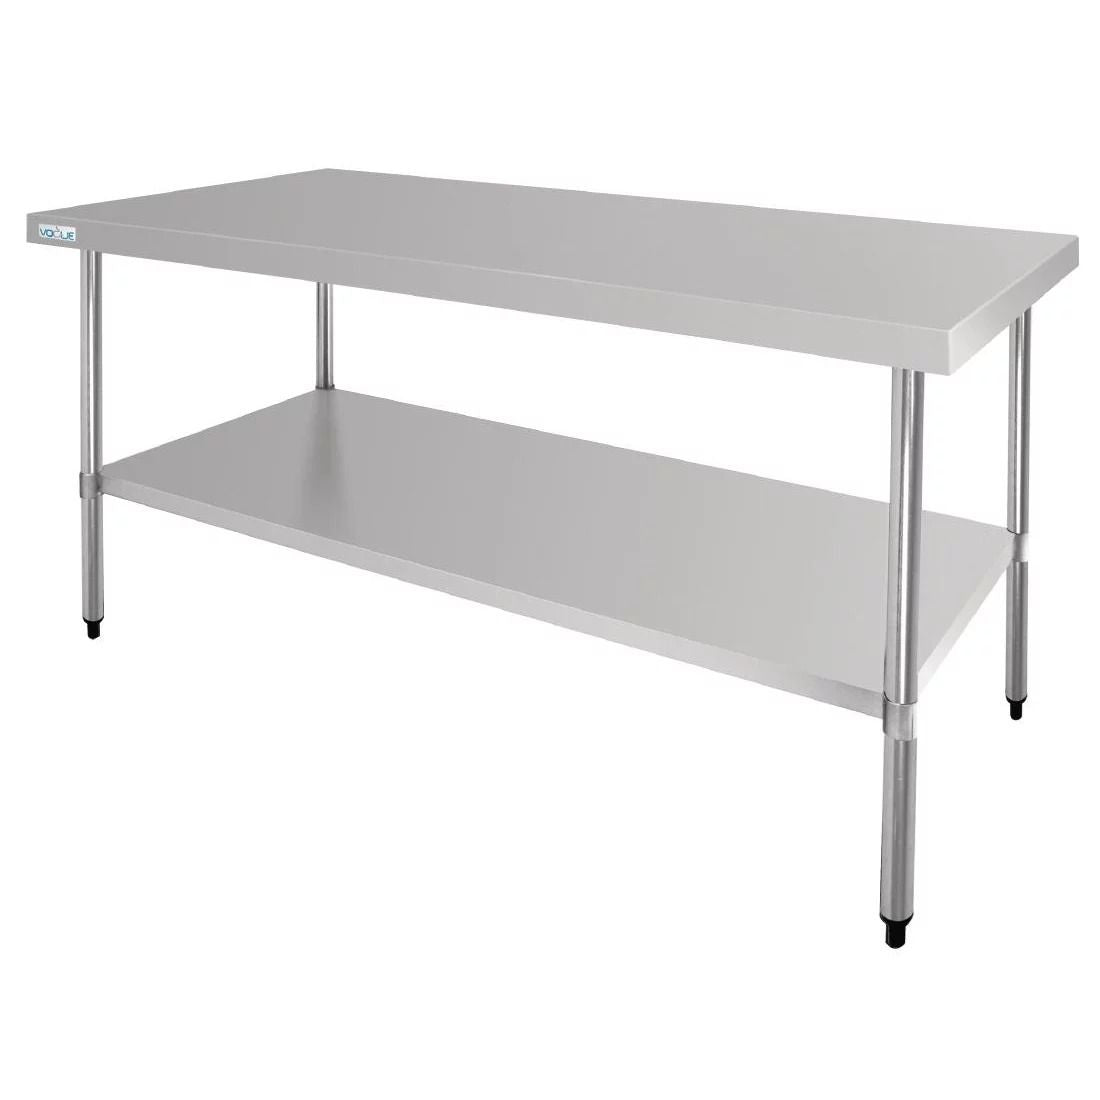 Vogue Stainless Steel Centre Table 1800mm - GL279